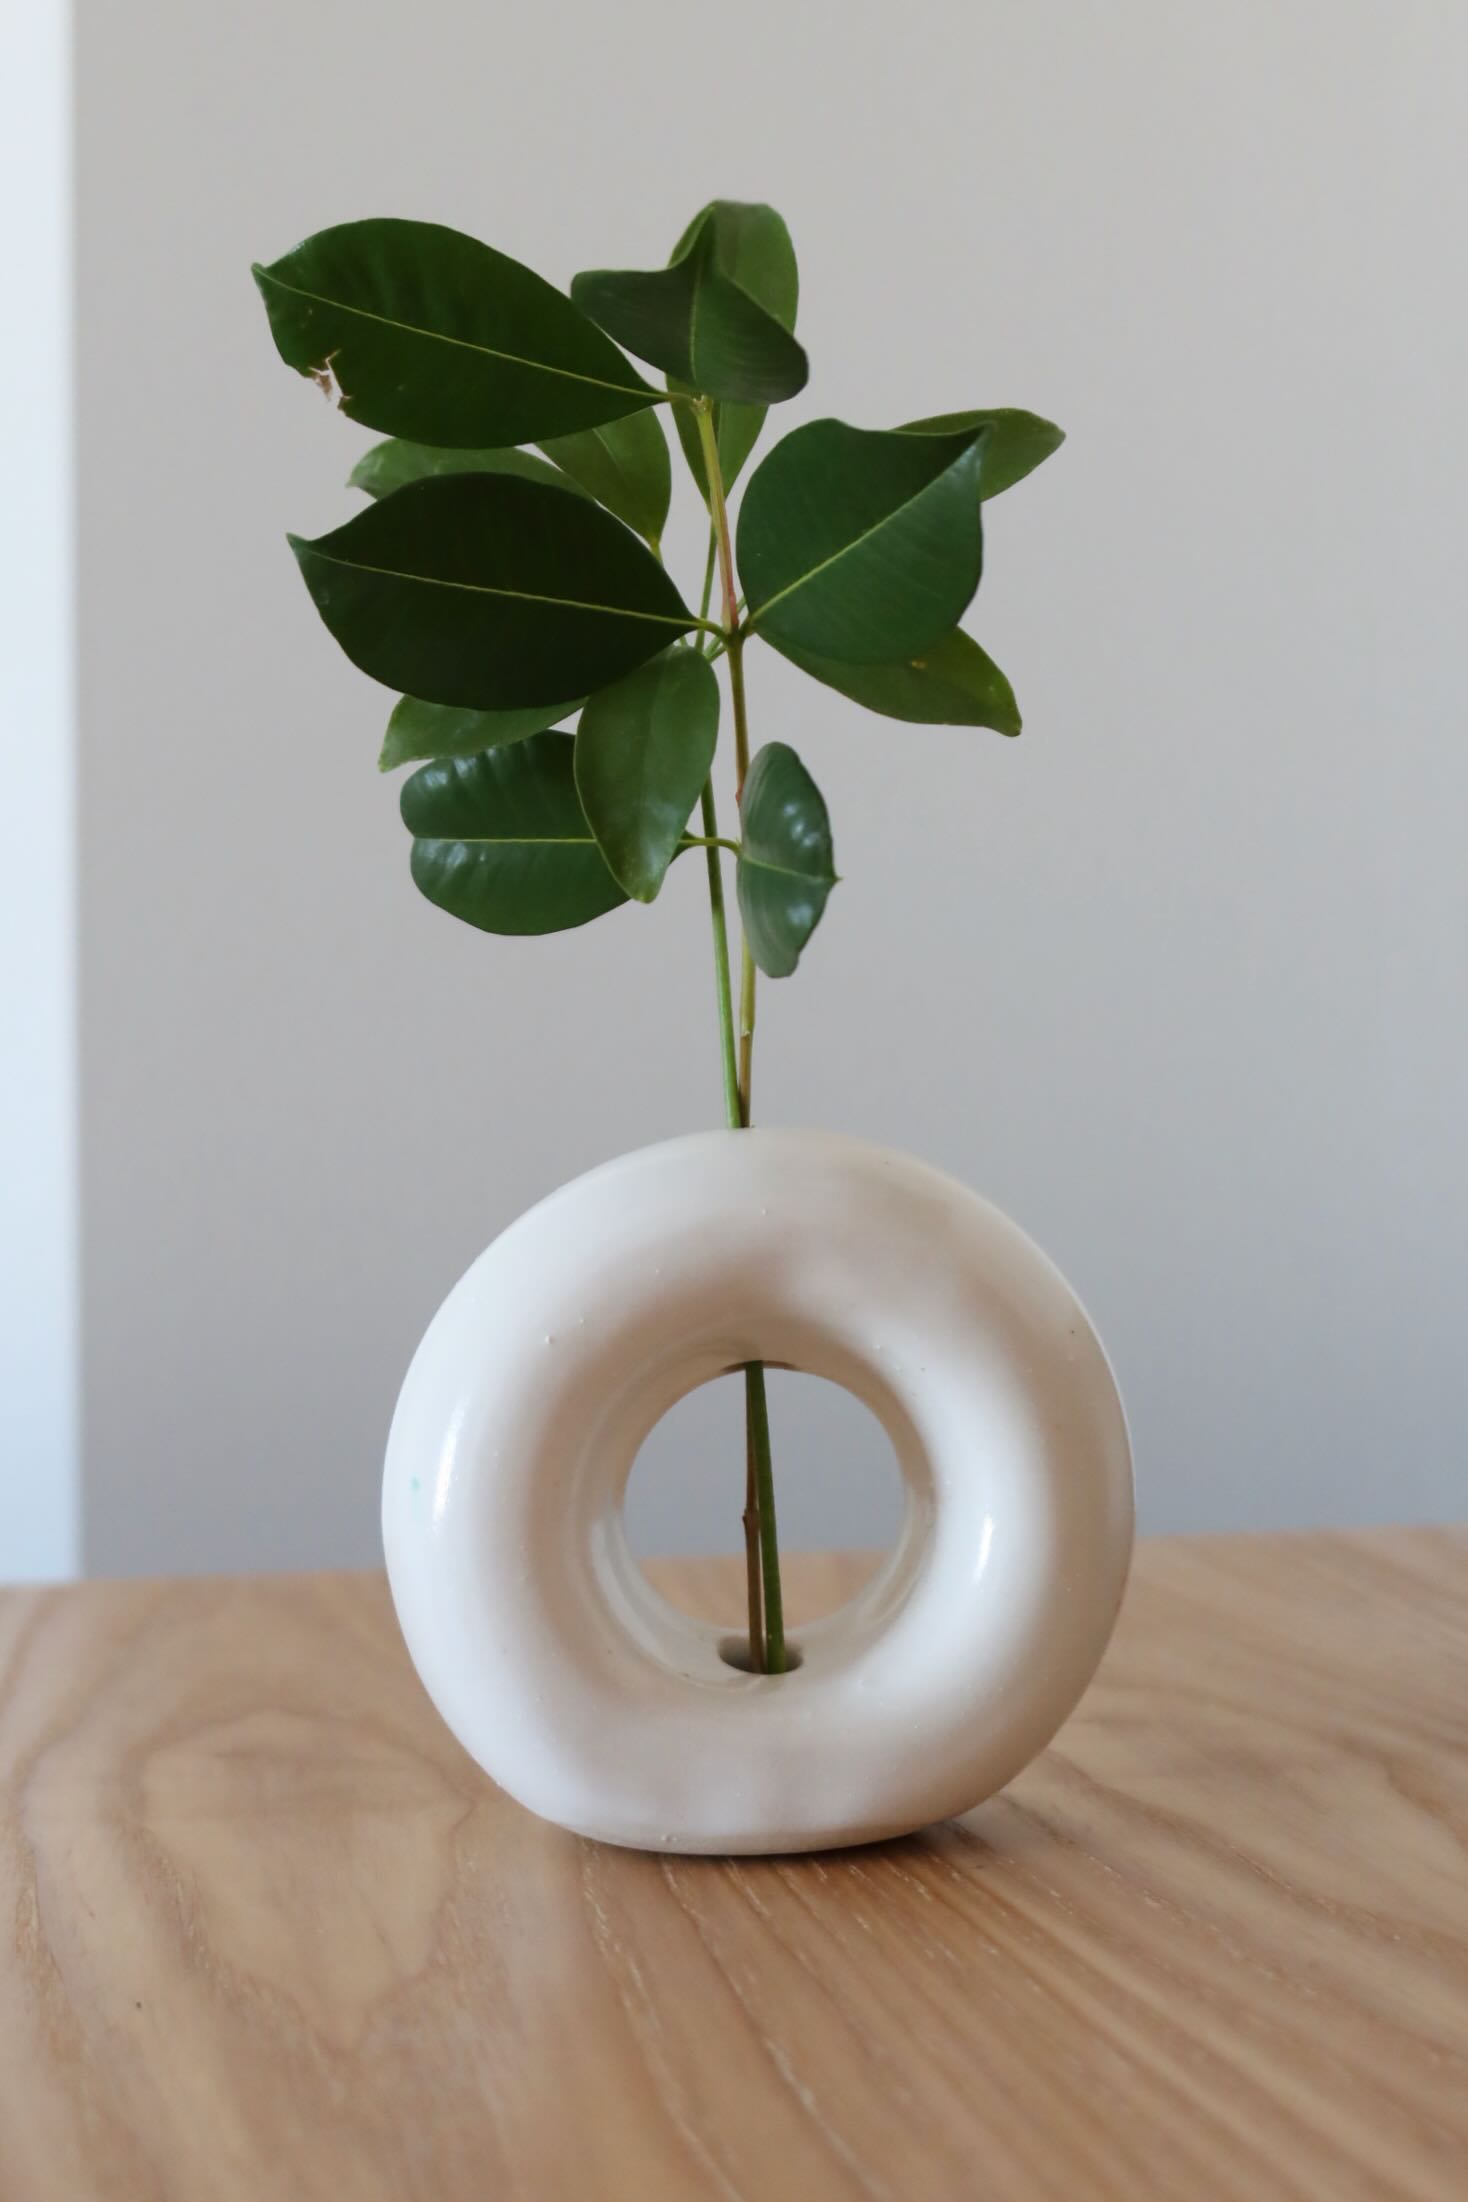 assets/ceramics1.jpeg|Photo of a ceramic vase shaped like a donut with a stem in it